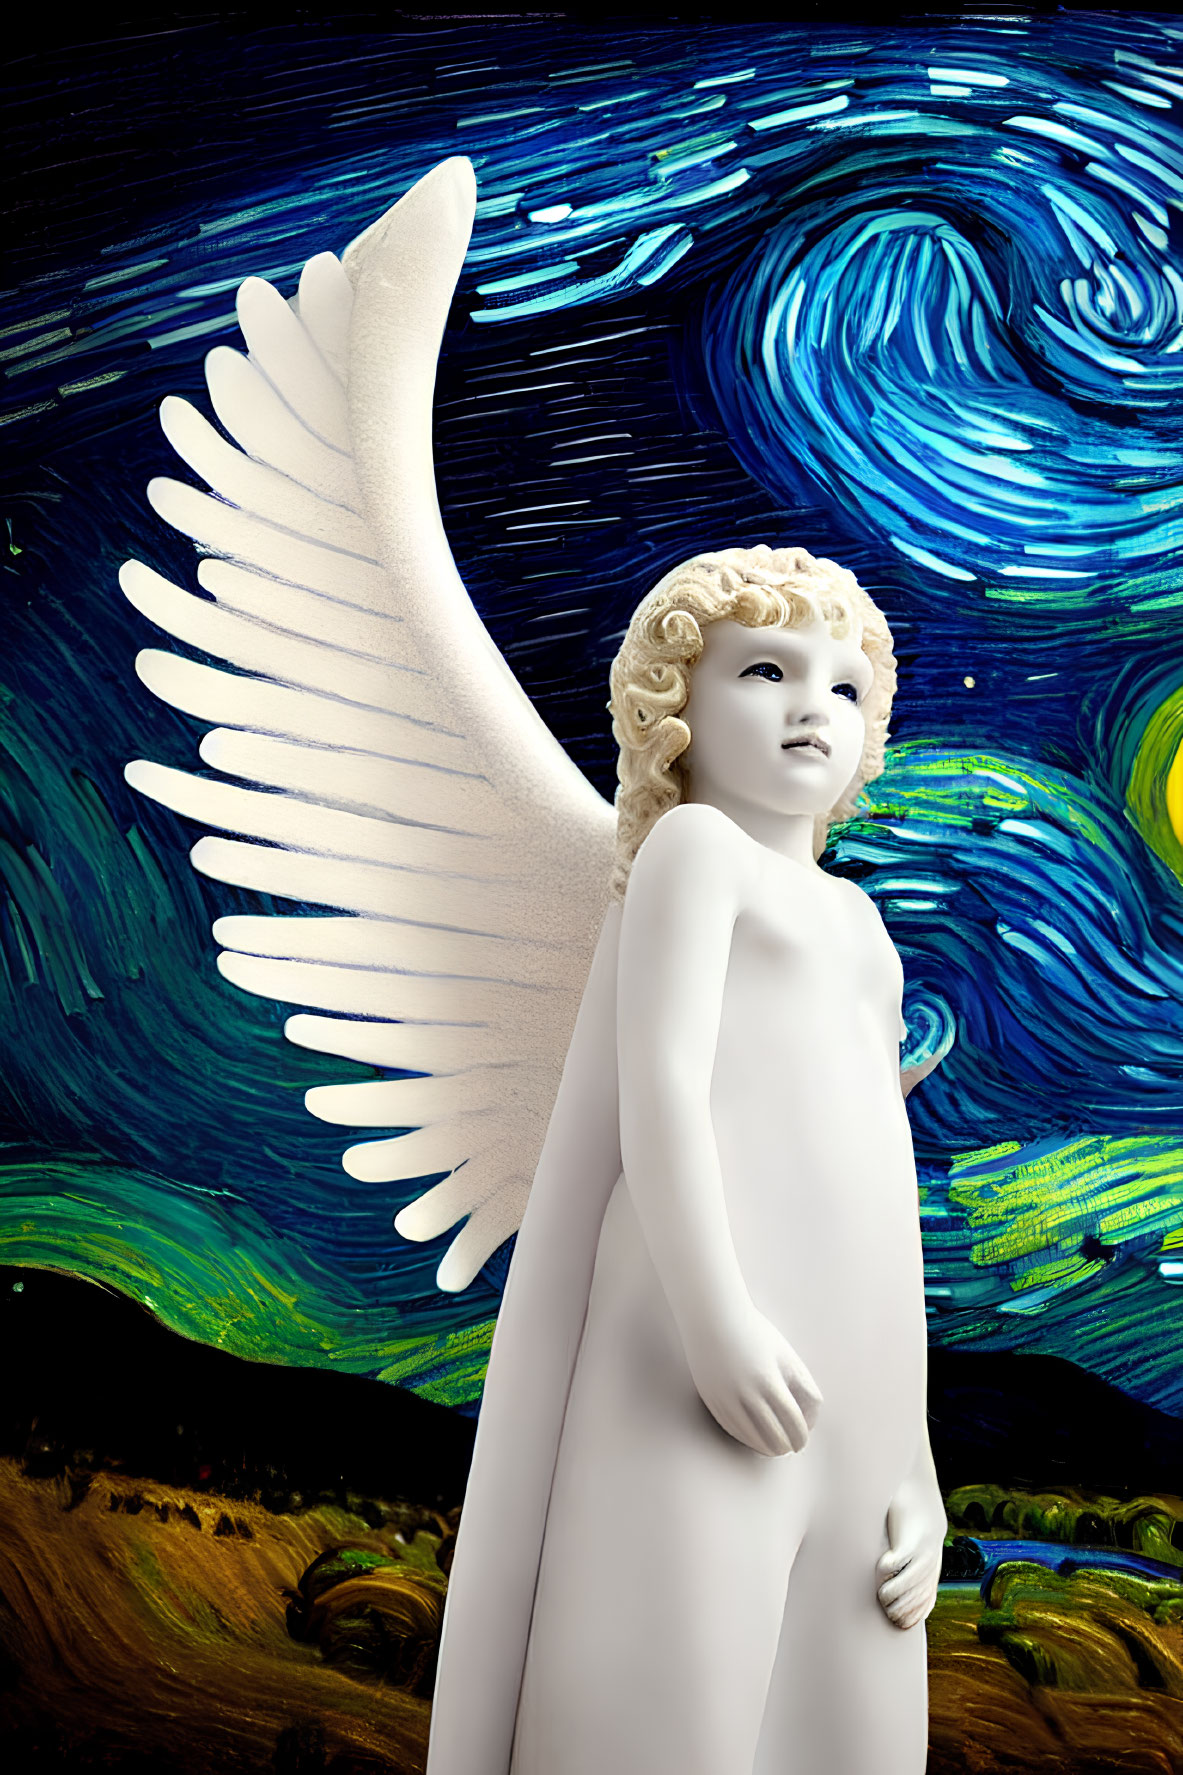 Angel statue with extended wing against swirling blue and gold backdrop inspired by Starry Night